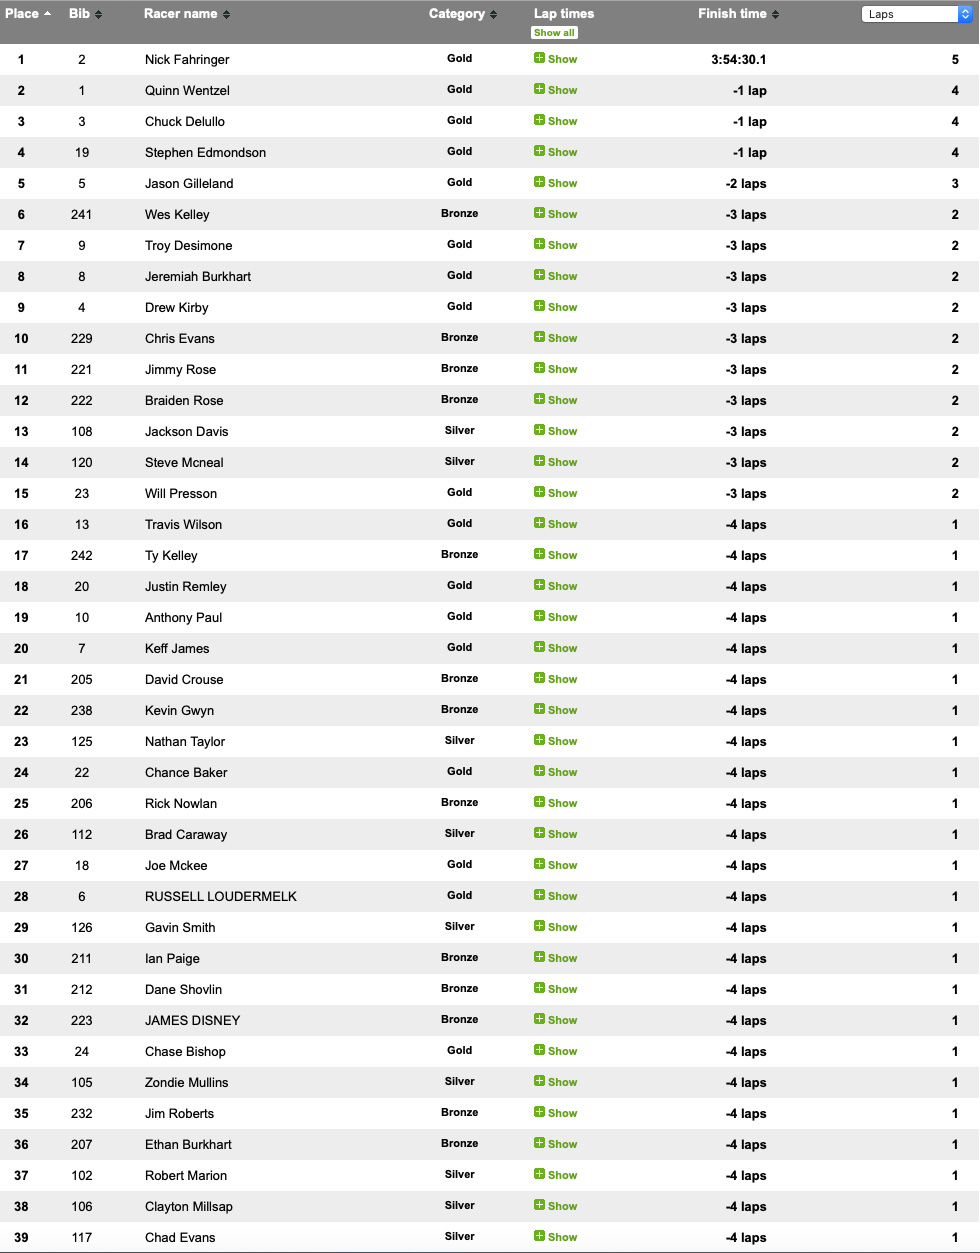 covid_crusher_2020_results_final